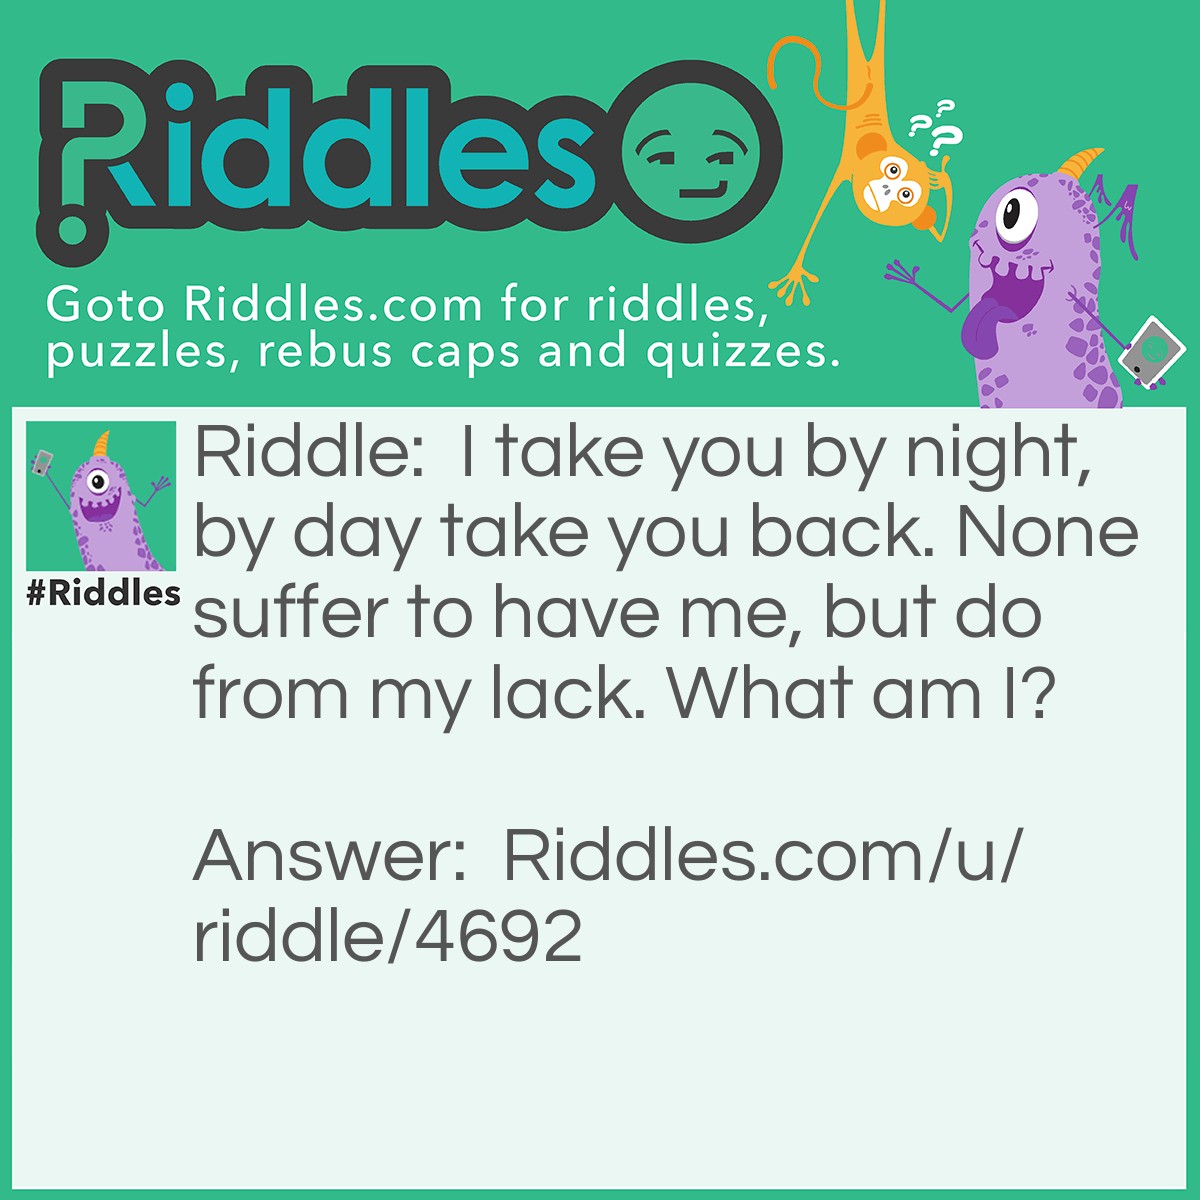 Riddle: I take you by night, by day take you back. None suffer to have me, but do from my lack. What am I? Answer: Sleep